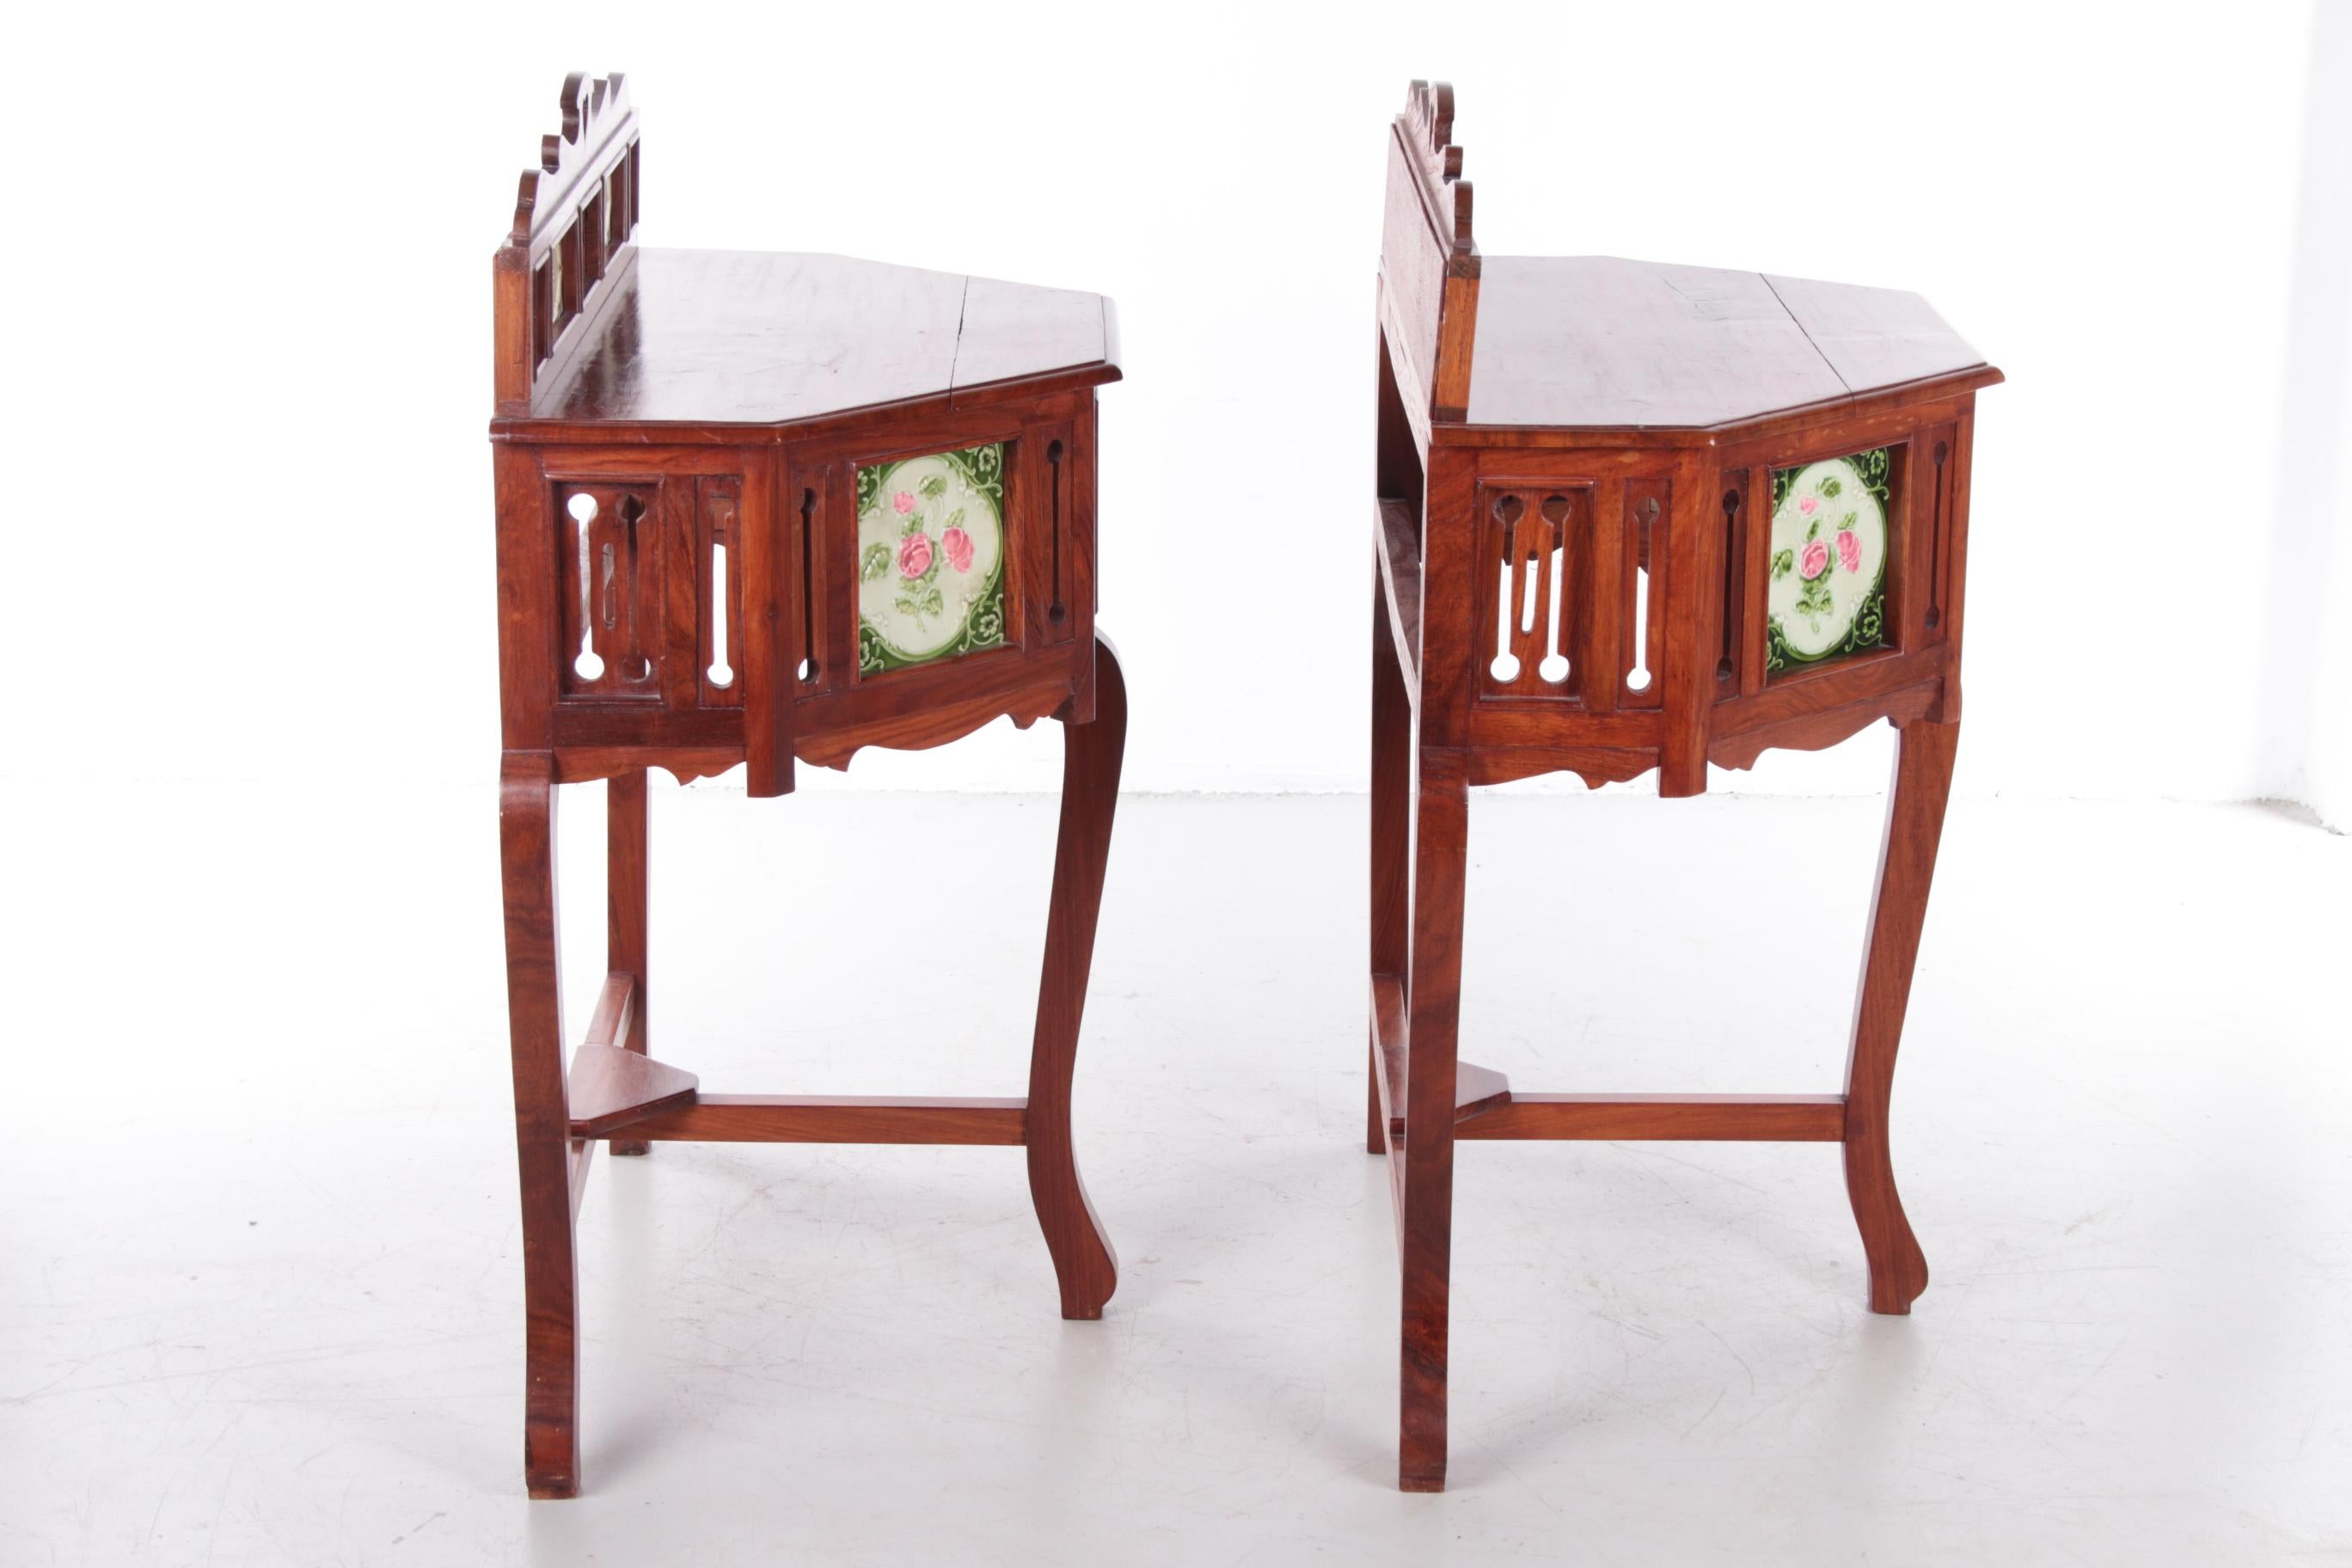 Mid-20th Century Set Portuguese Colonial Wall Nightstands by Meranti with Tiles, 1930